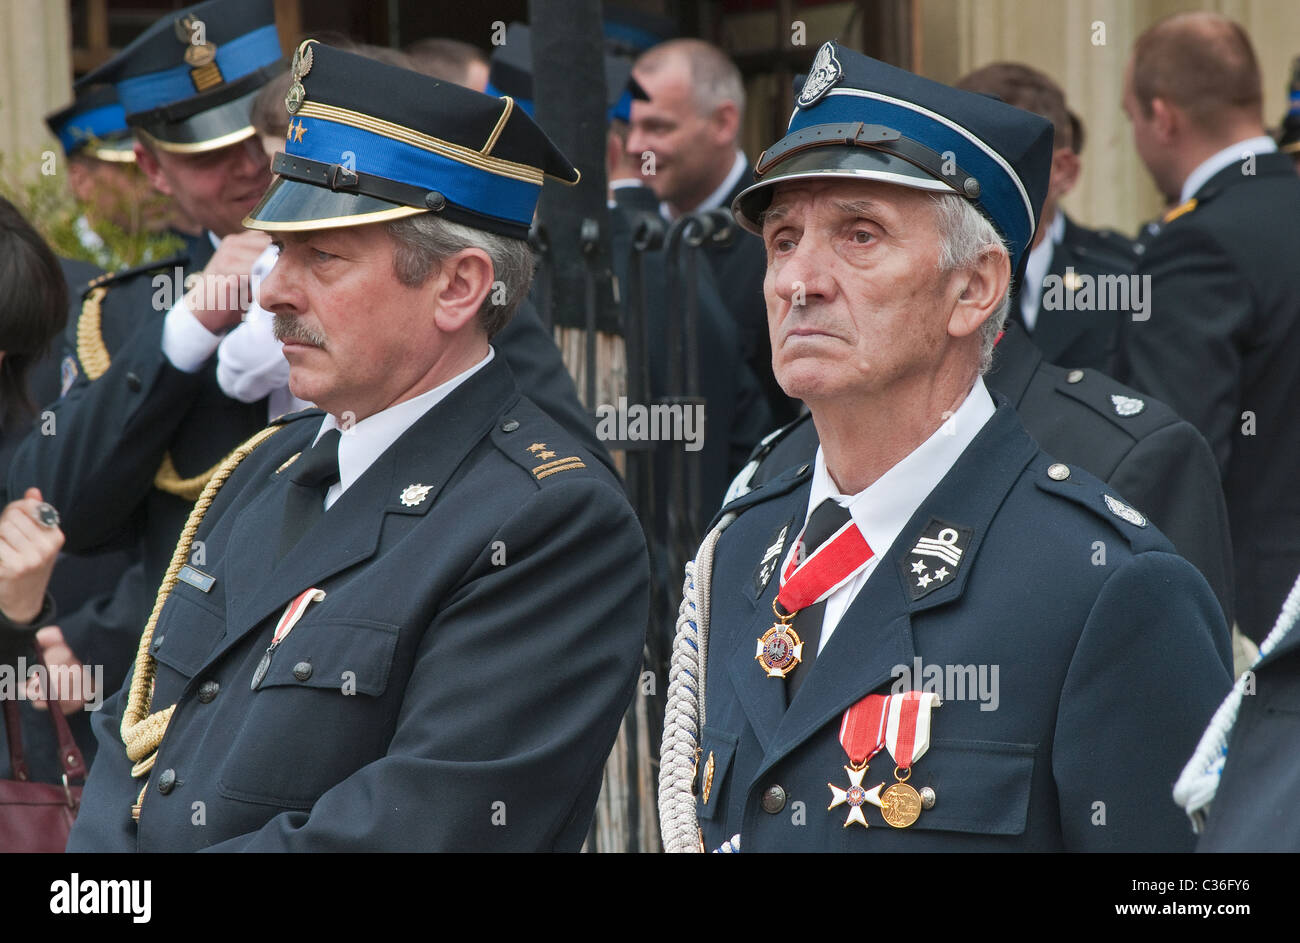 Veteran firemen at Firefighters Day festival at Rynek (Market Square) in Wrocław, Lower Silesia, Poland Stock Photo